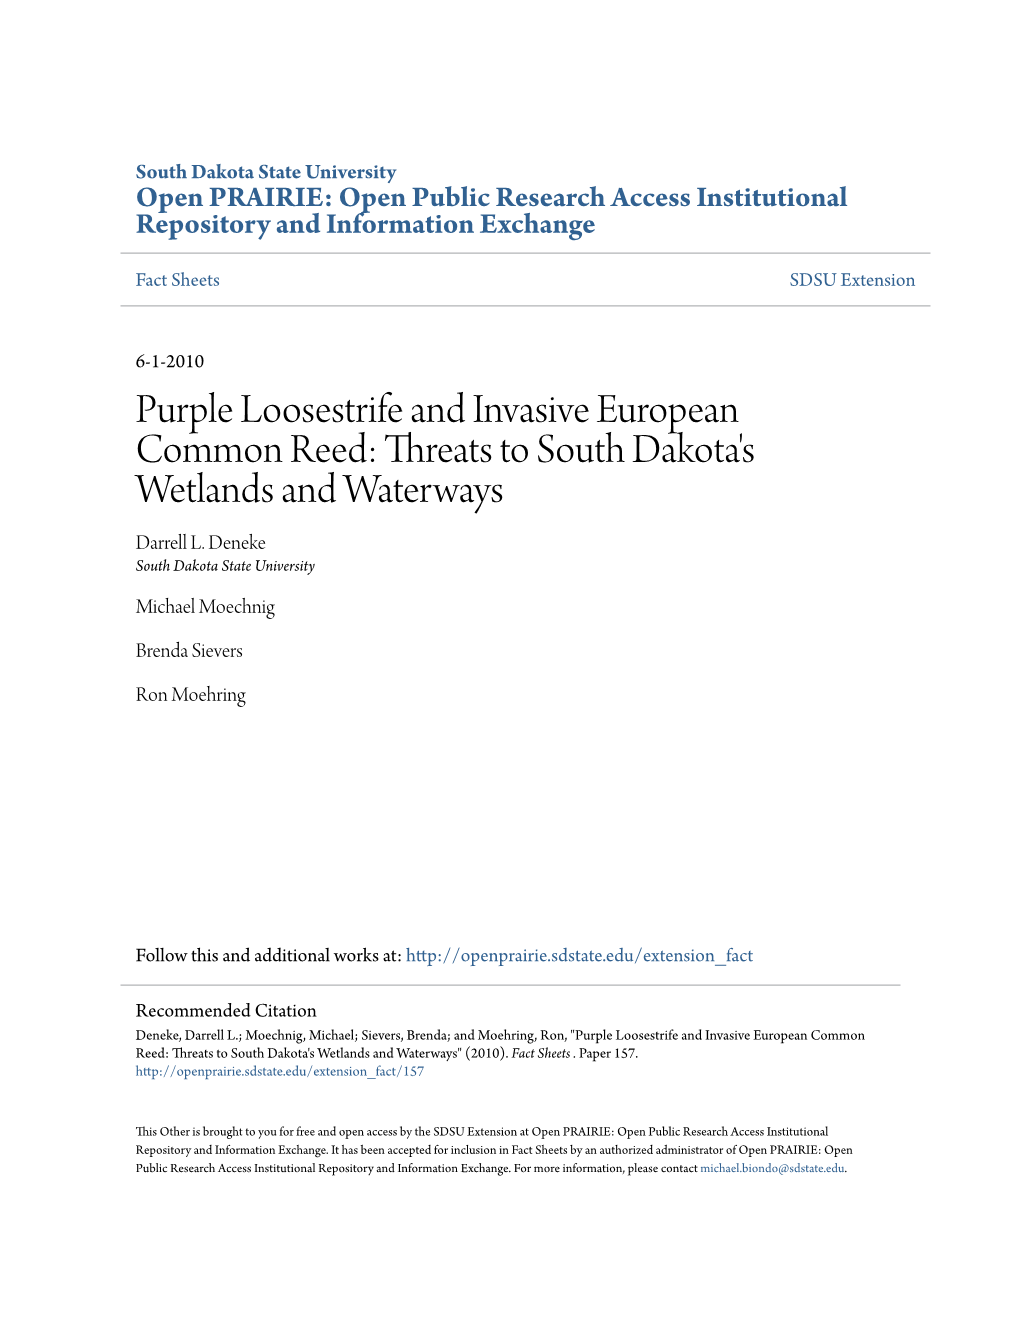 Purple Loosestrife and Invasive European Common Reed: Threats to South Dakota's Wetlands and Waterways Darrell L